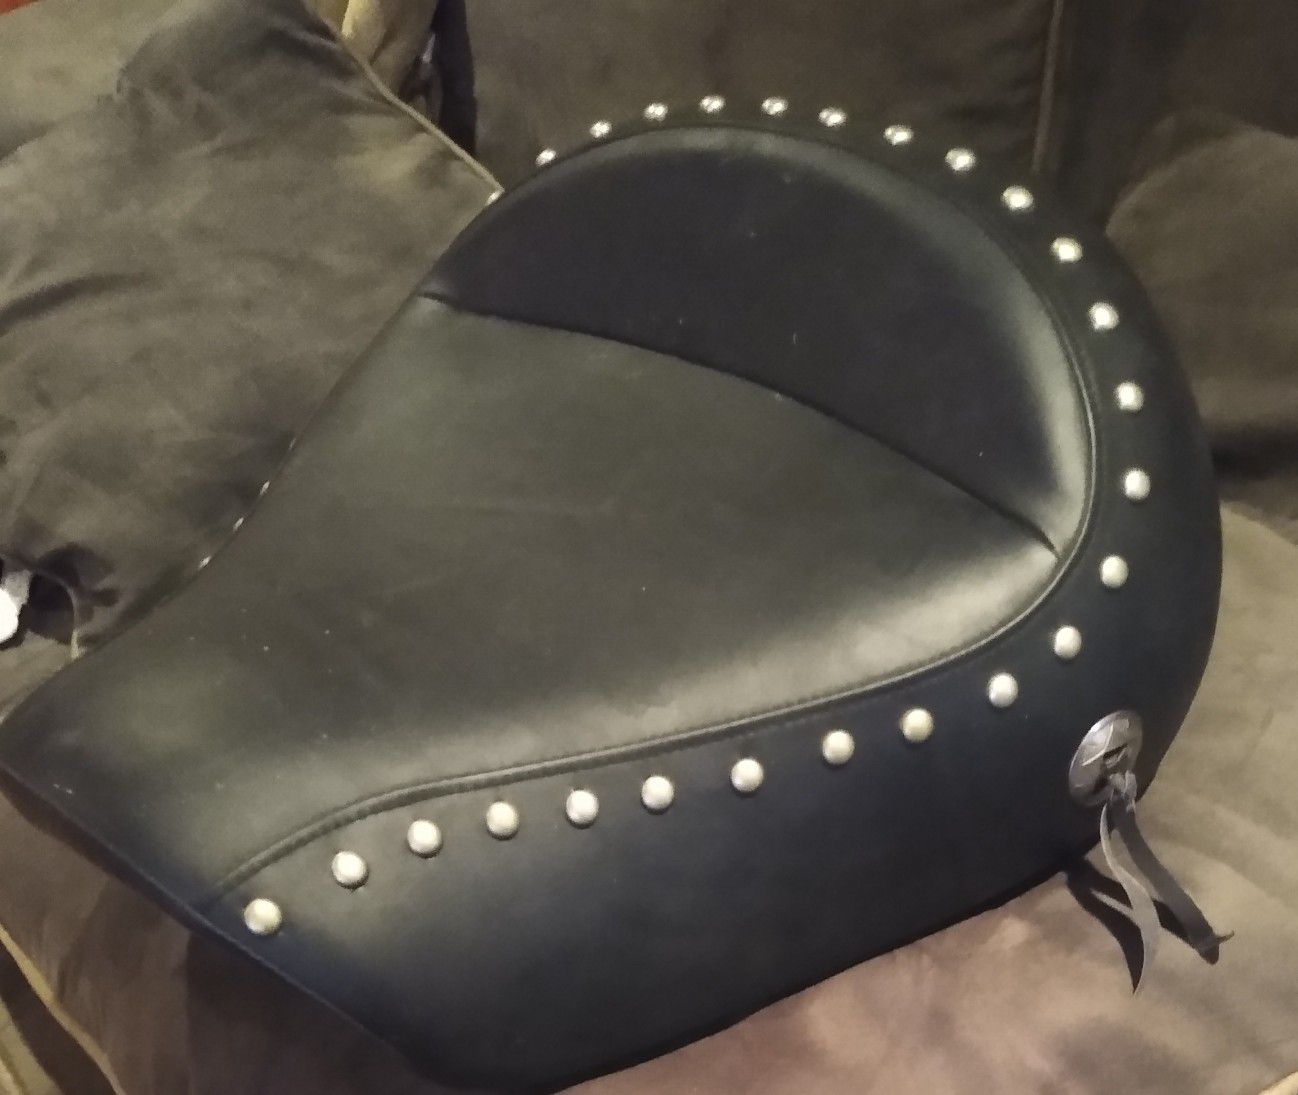 STILL AVAILABLE!Black leather motorcycle seat $75